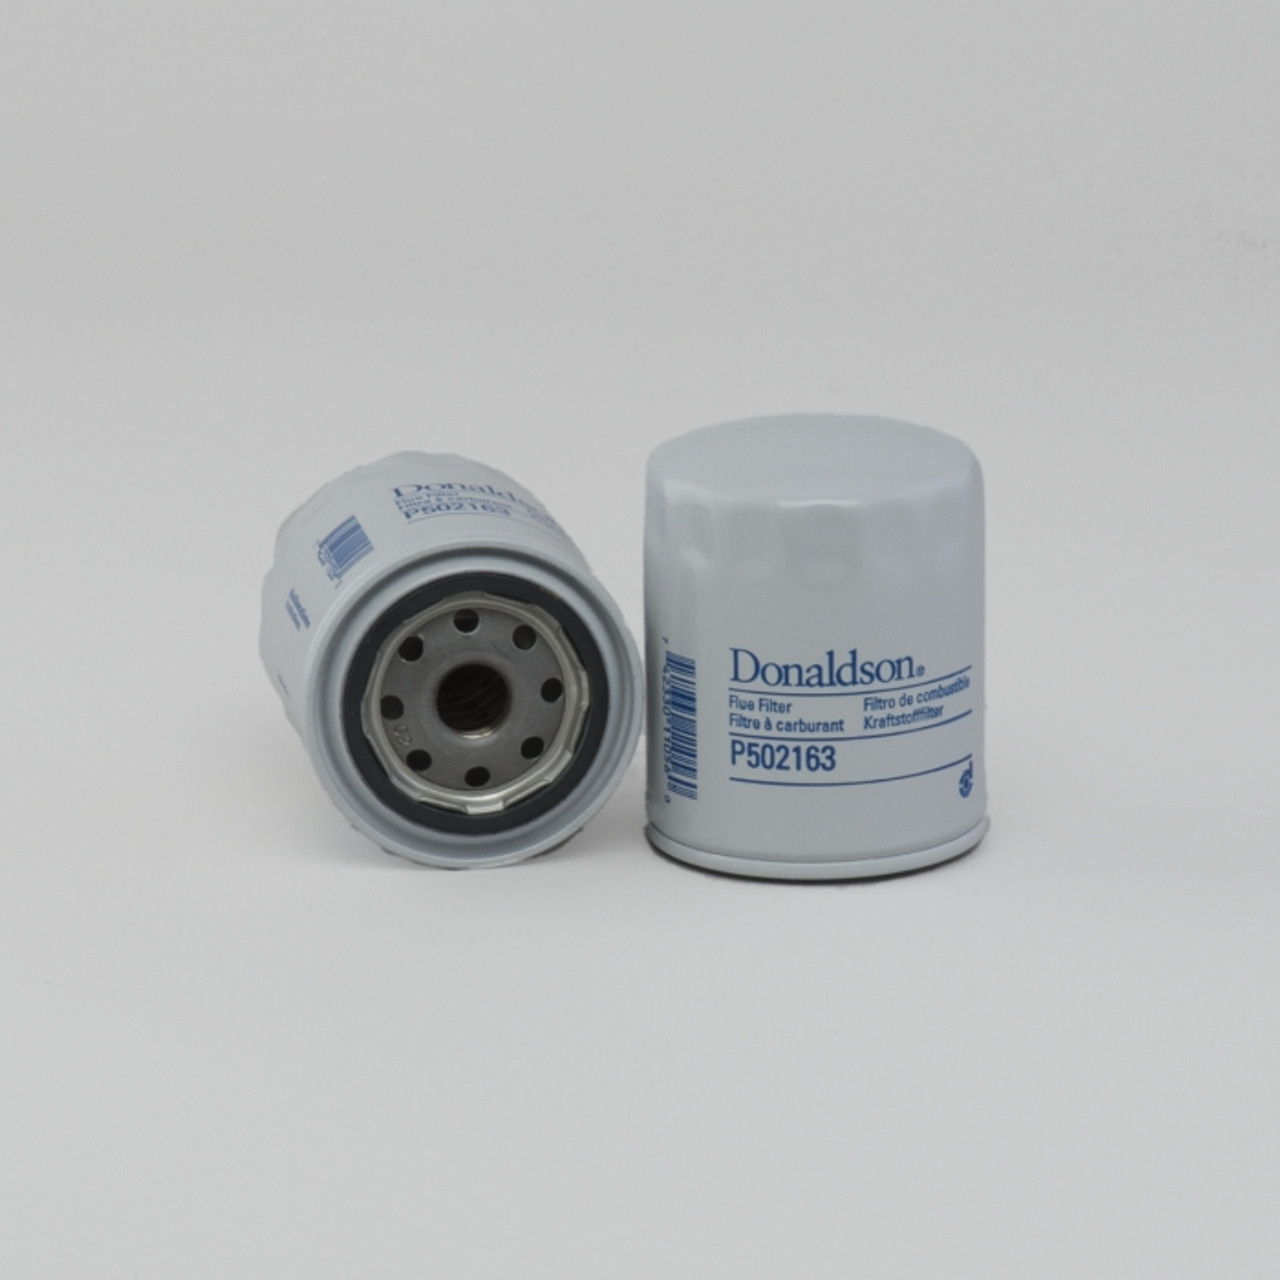 Donaldson P502163 Fuel Filter Spin-on- UD